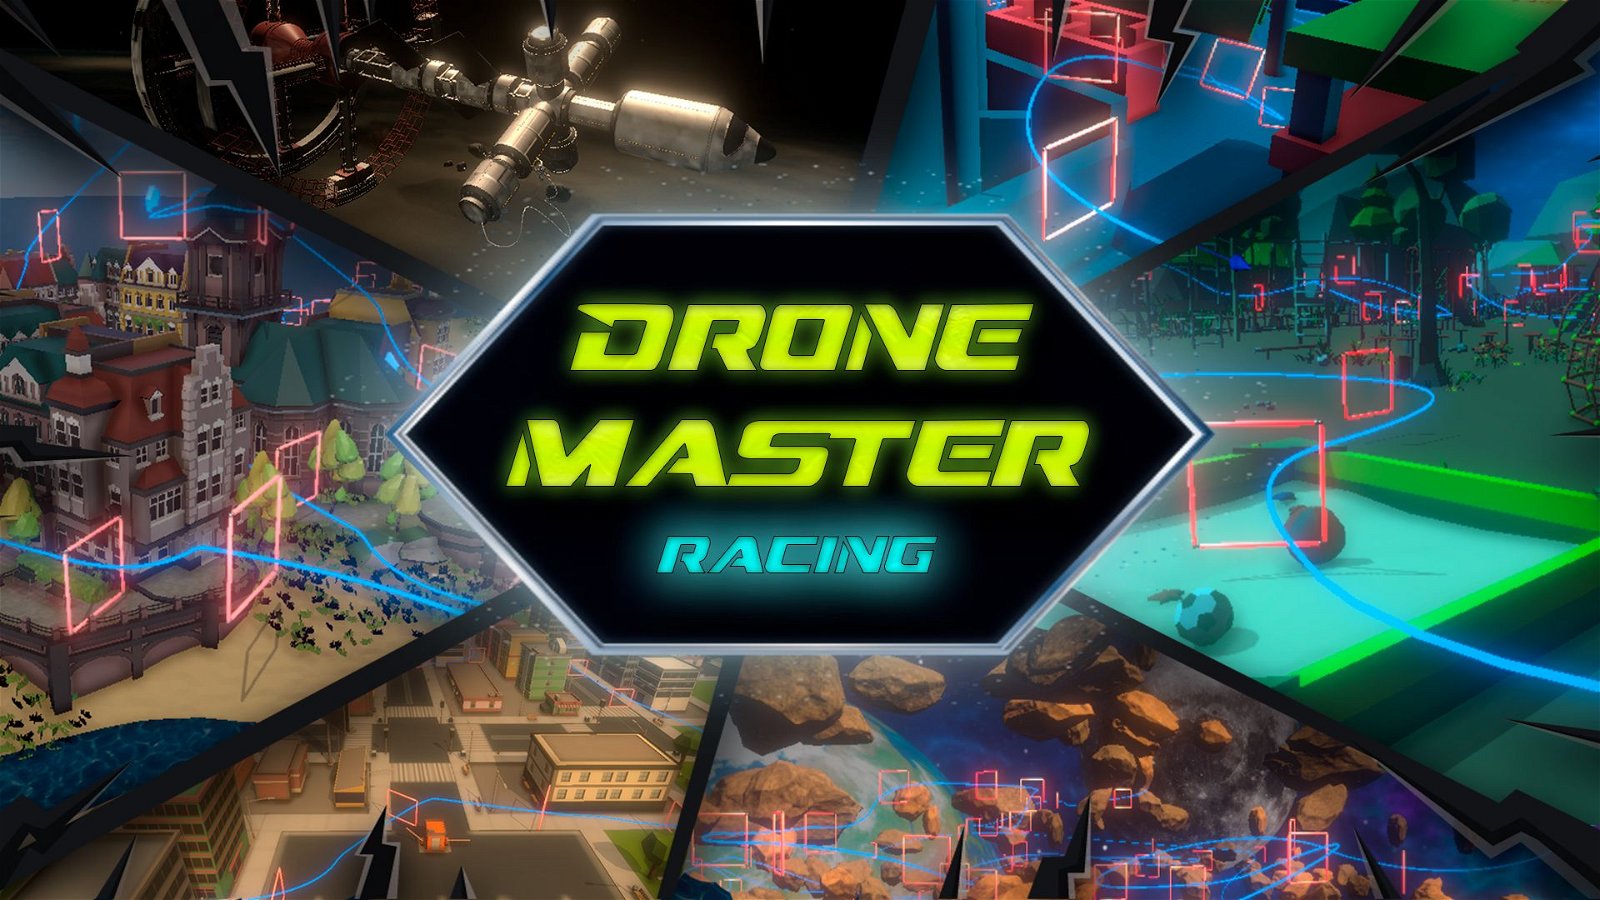 Image of Drone Master Racing